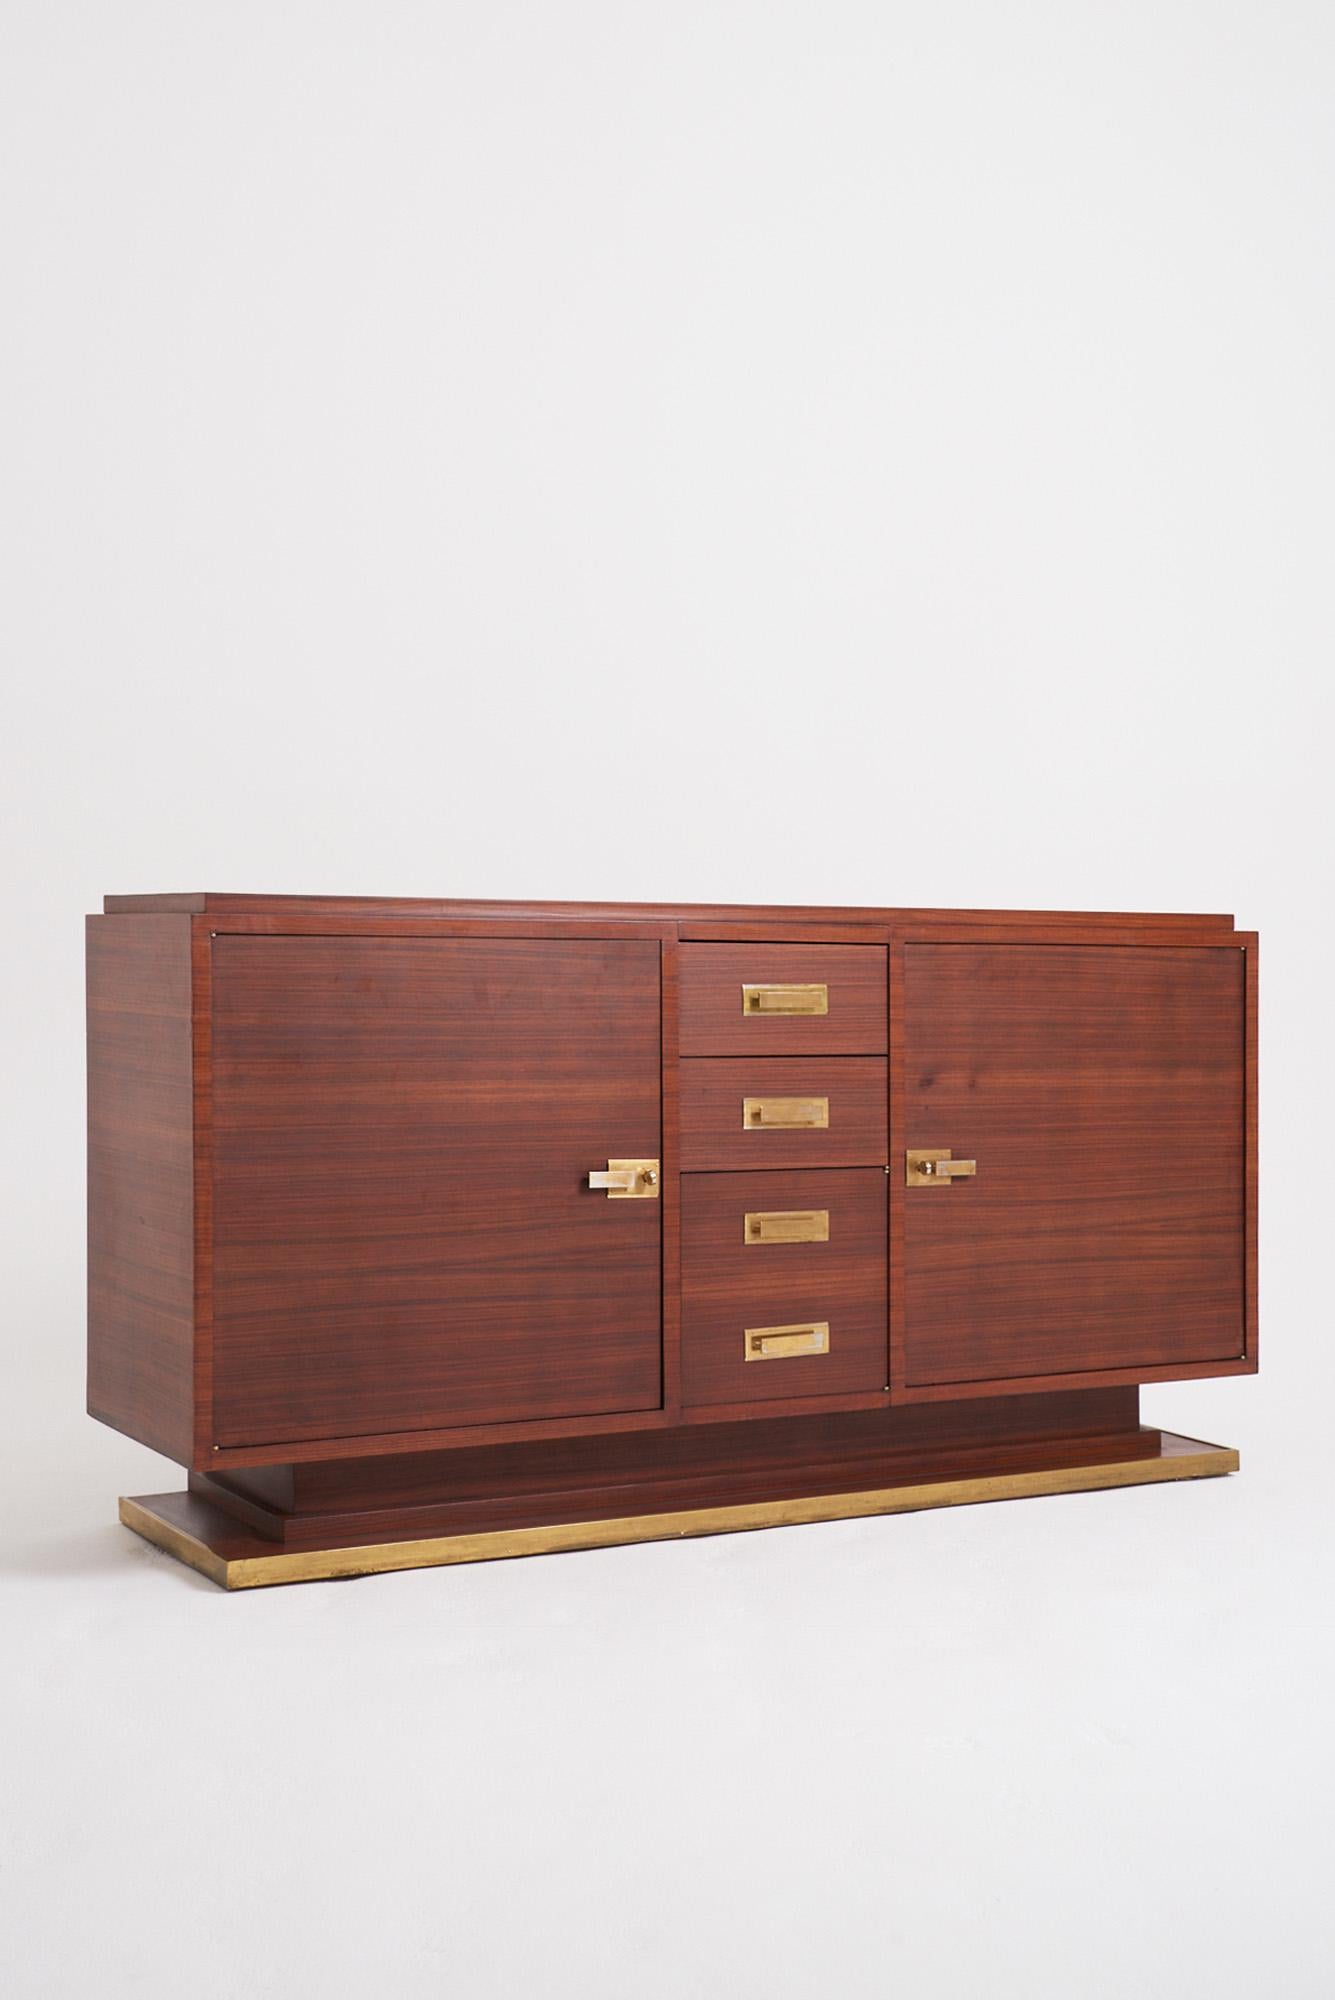 French Art Deco Mahogany Sideboard For Sale